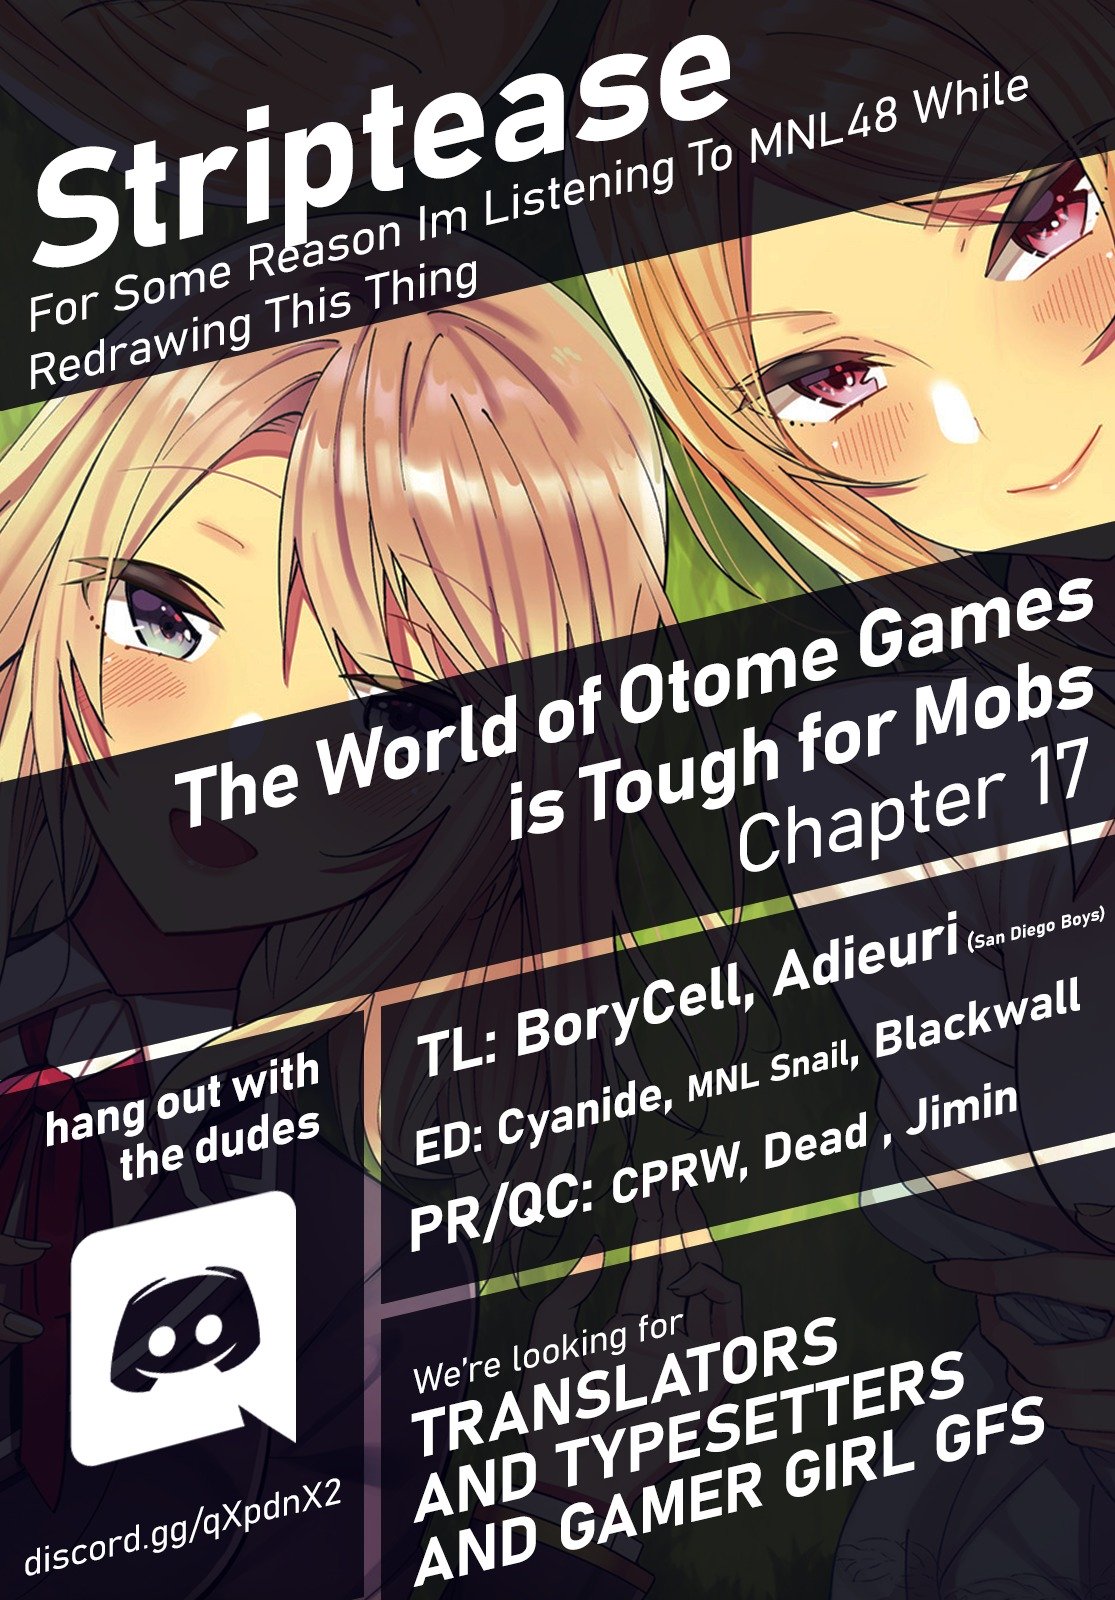 The World of Otome Games is Tough for Mobs ch.17